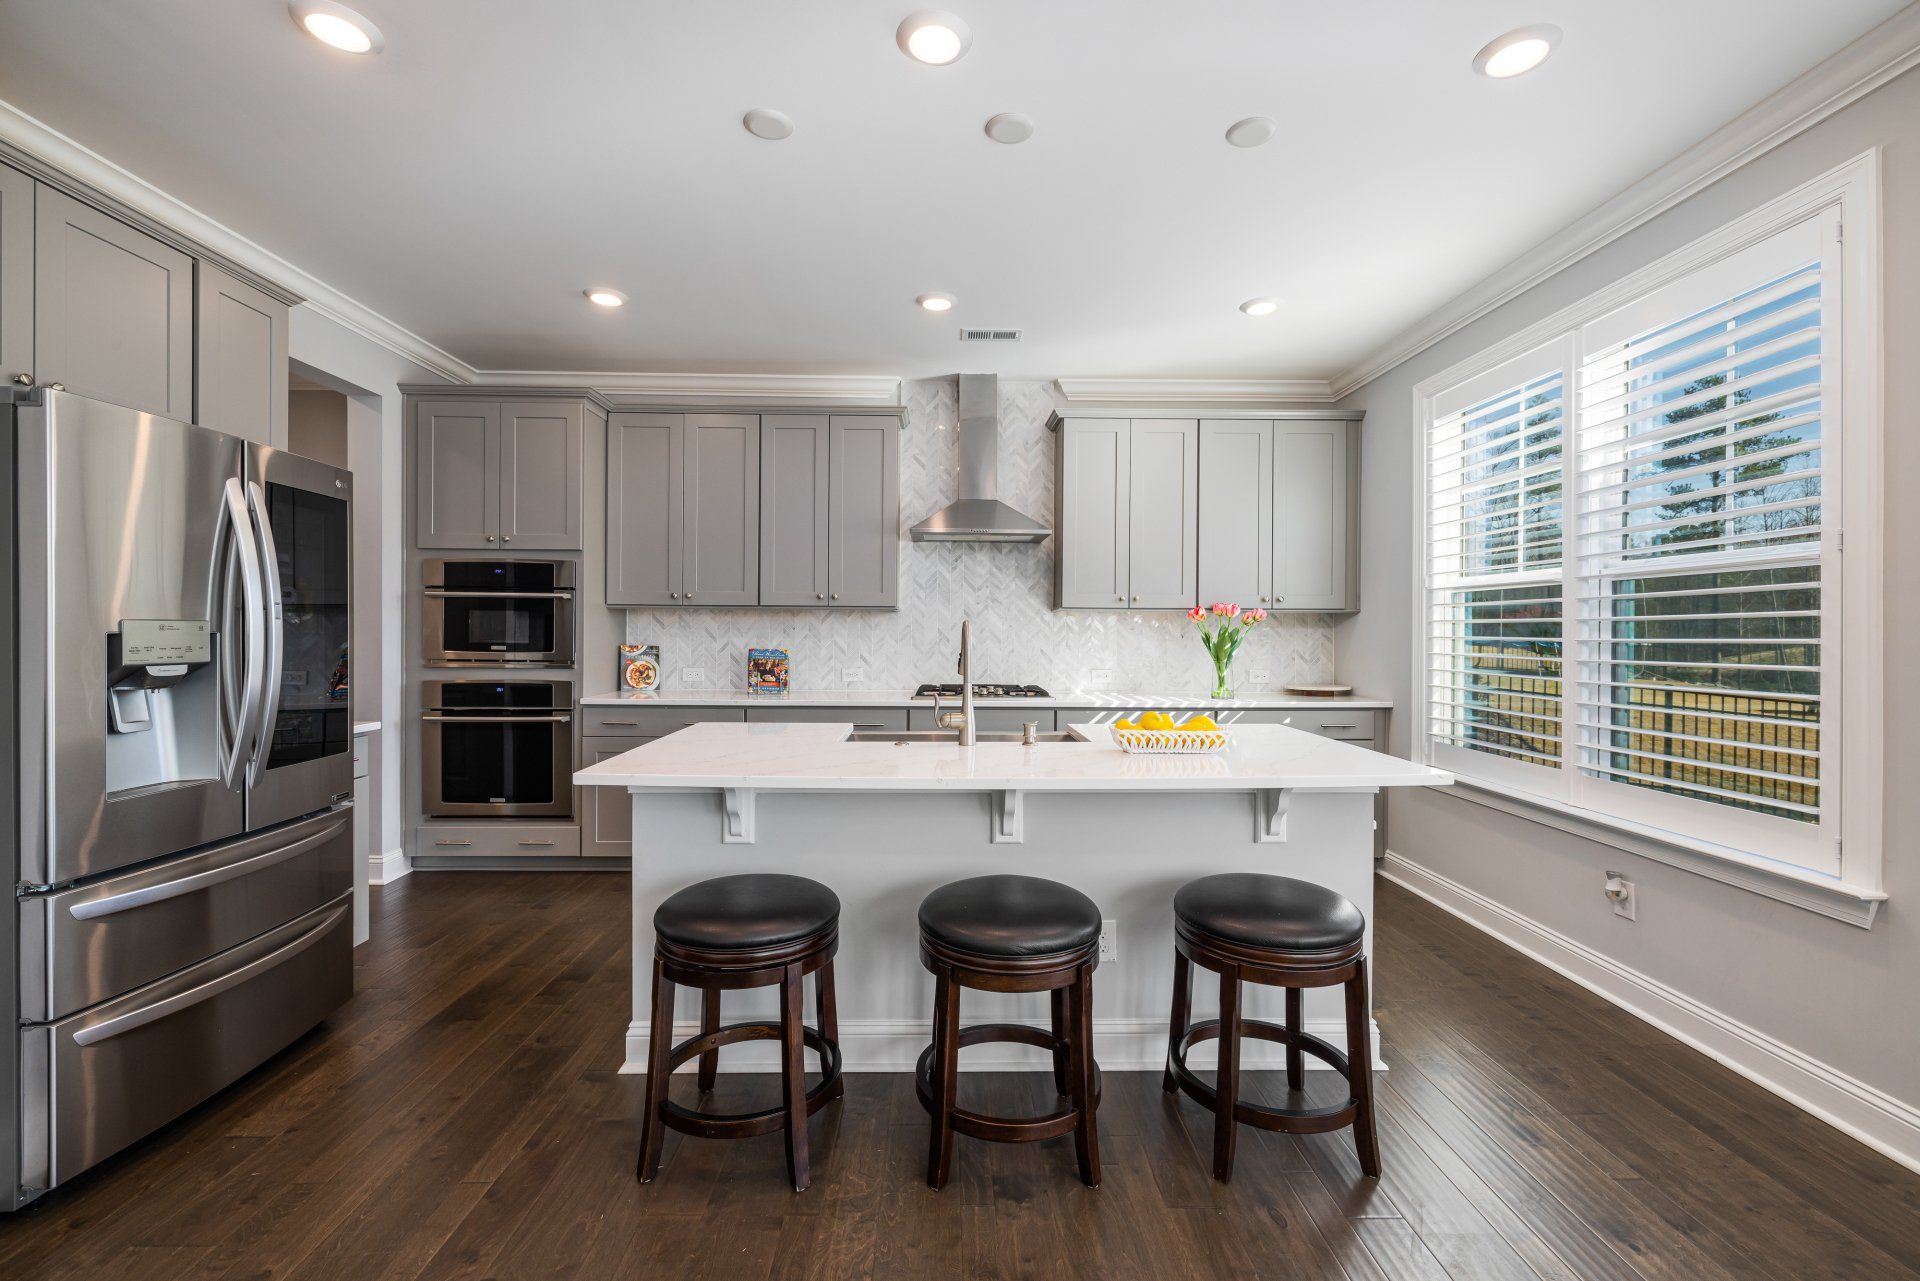 A modern kitchen with gray cabinets, marble counter and backsplash, and recessed lighting